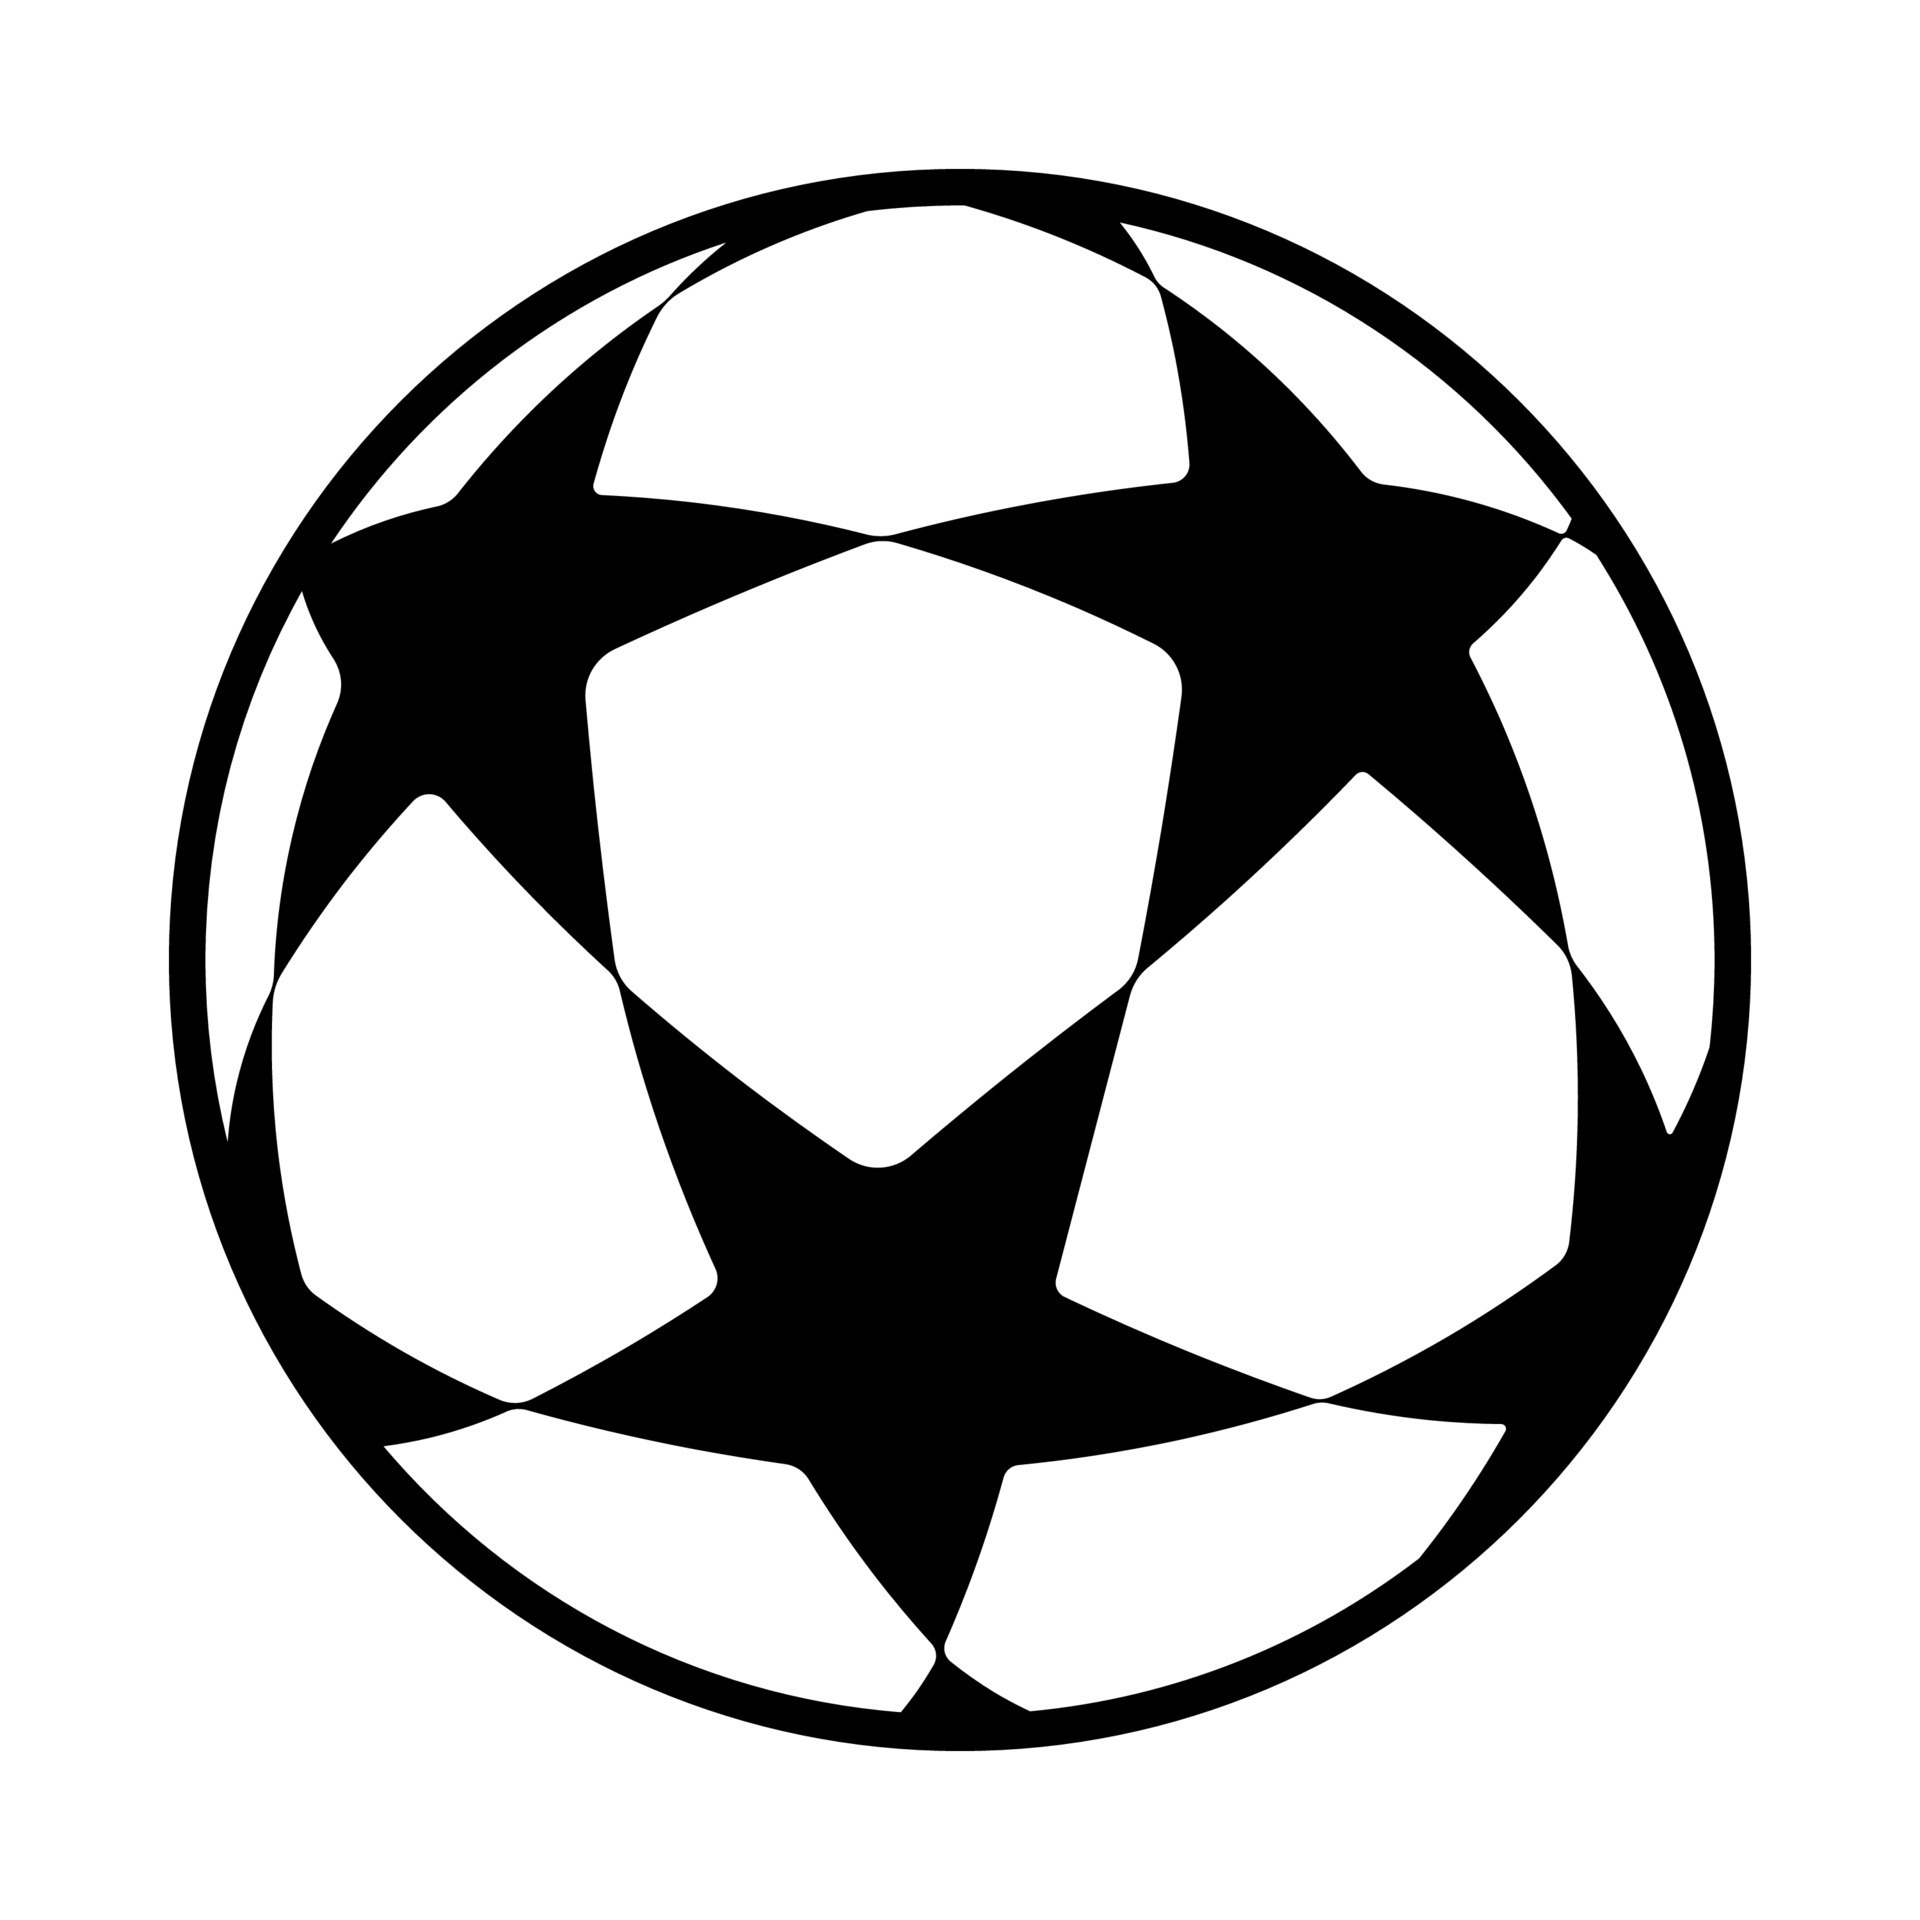 Soccer ball or football flat vector icon simple black style with star ...